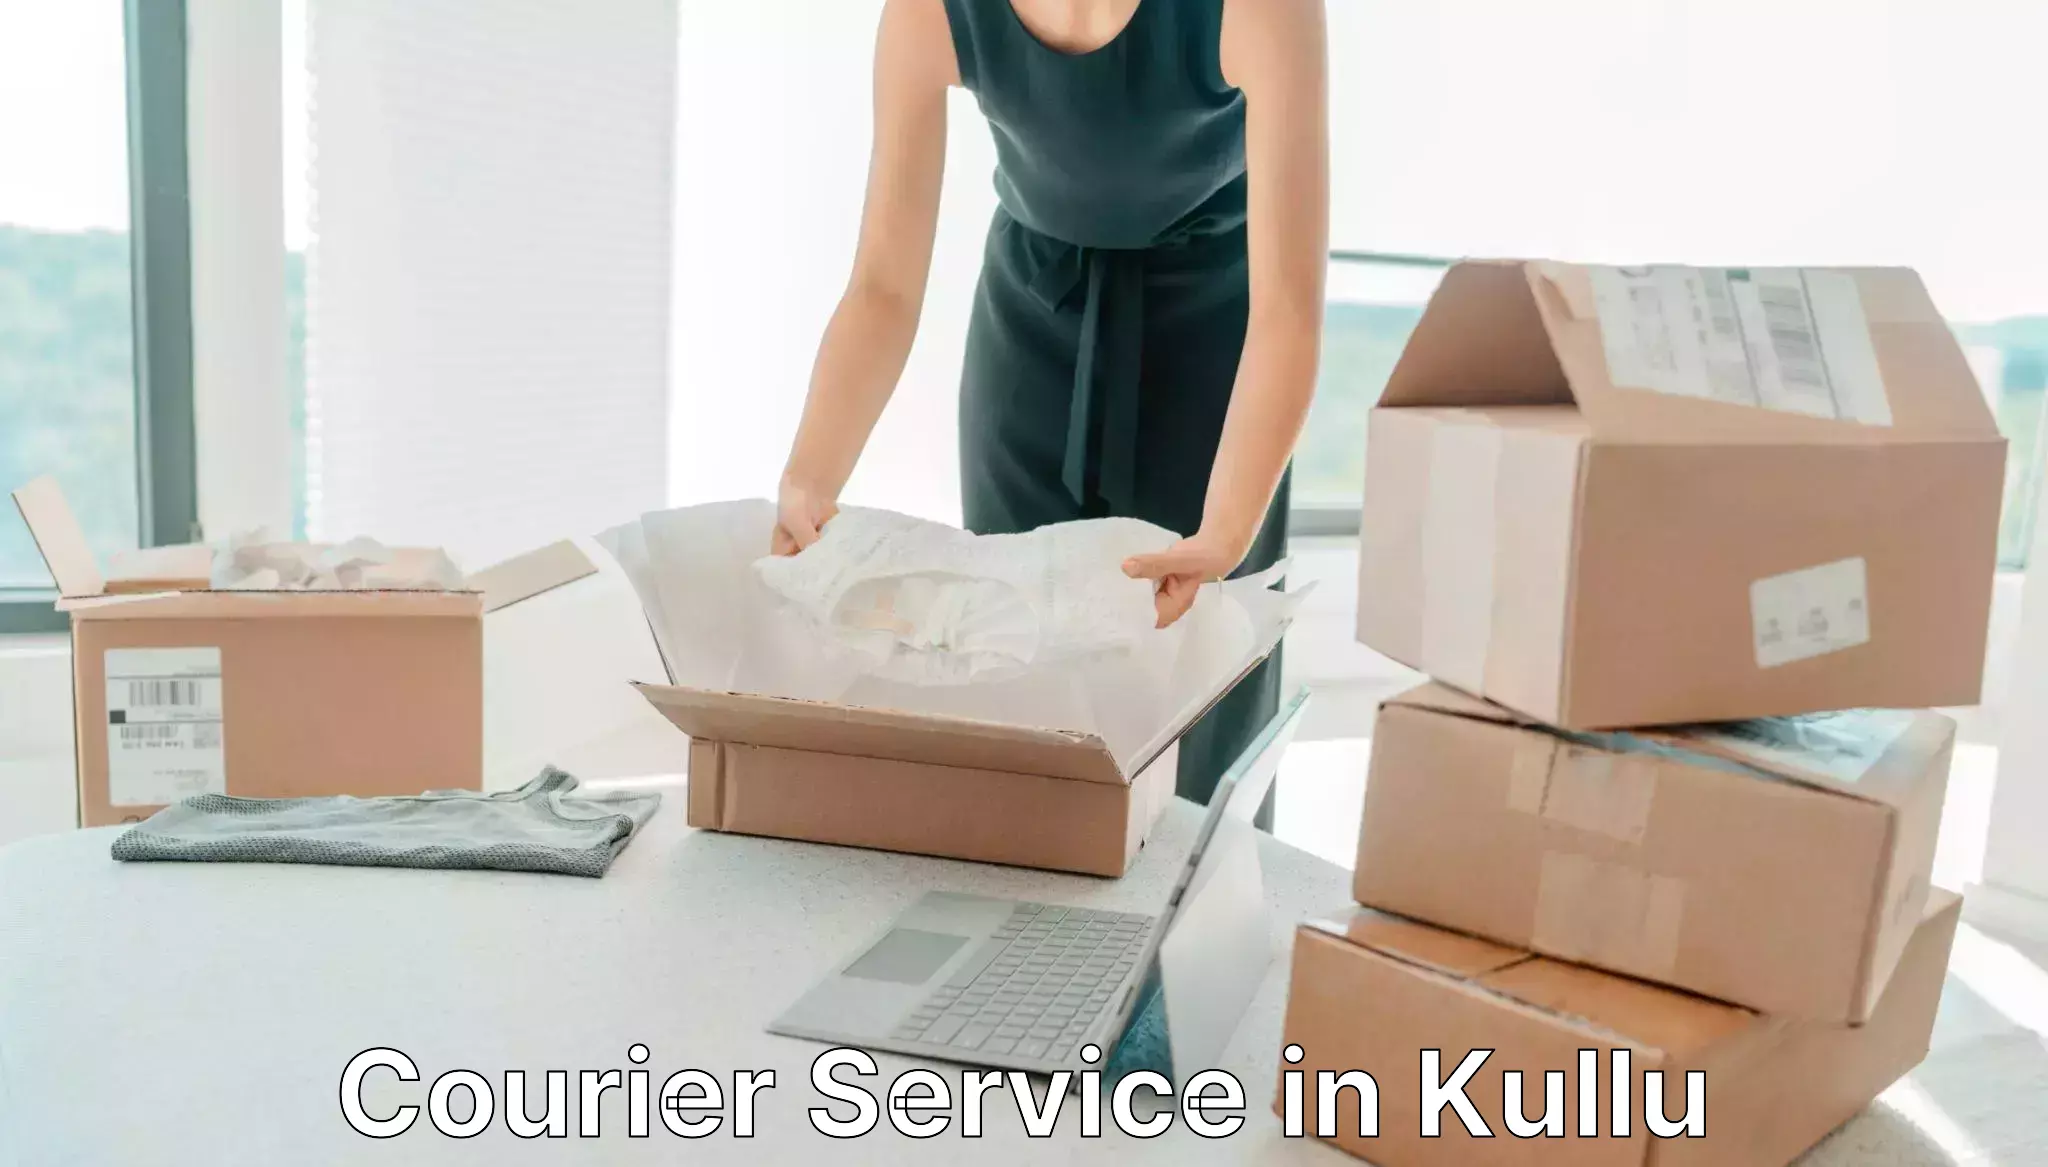 Advanced shipping services in Kullu